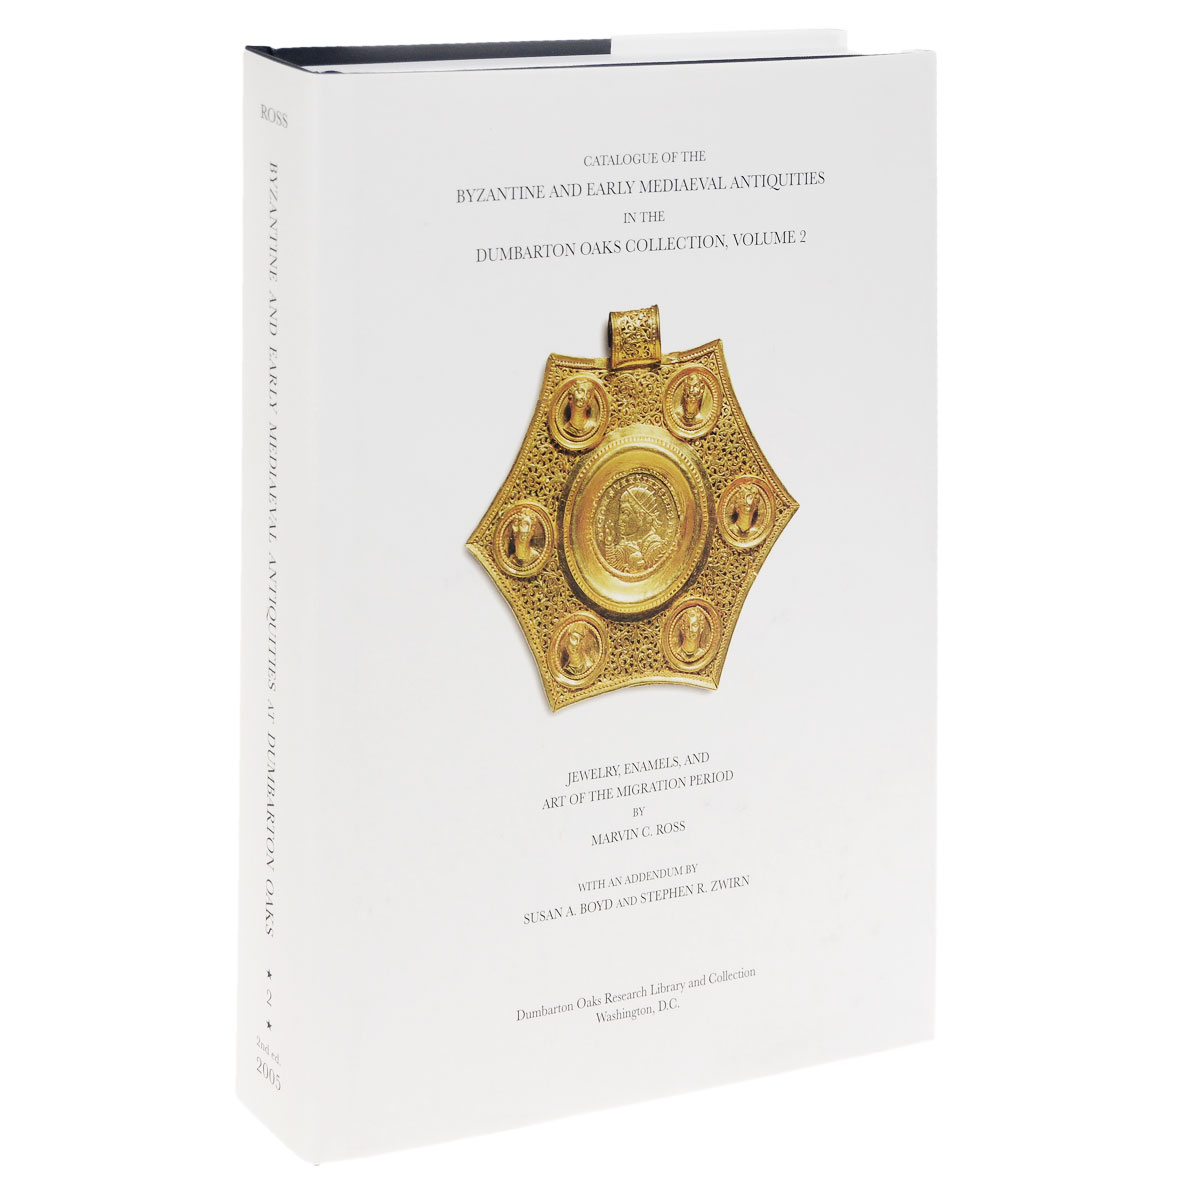 Catalogue of the Byzantine and Early Mediaeval Antiquities in the Dumbarton Oaks Collection: Volume 2: Jewelry, Enamels and Art of the Migration Period